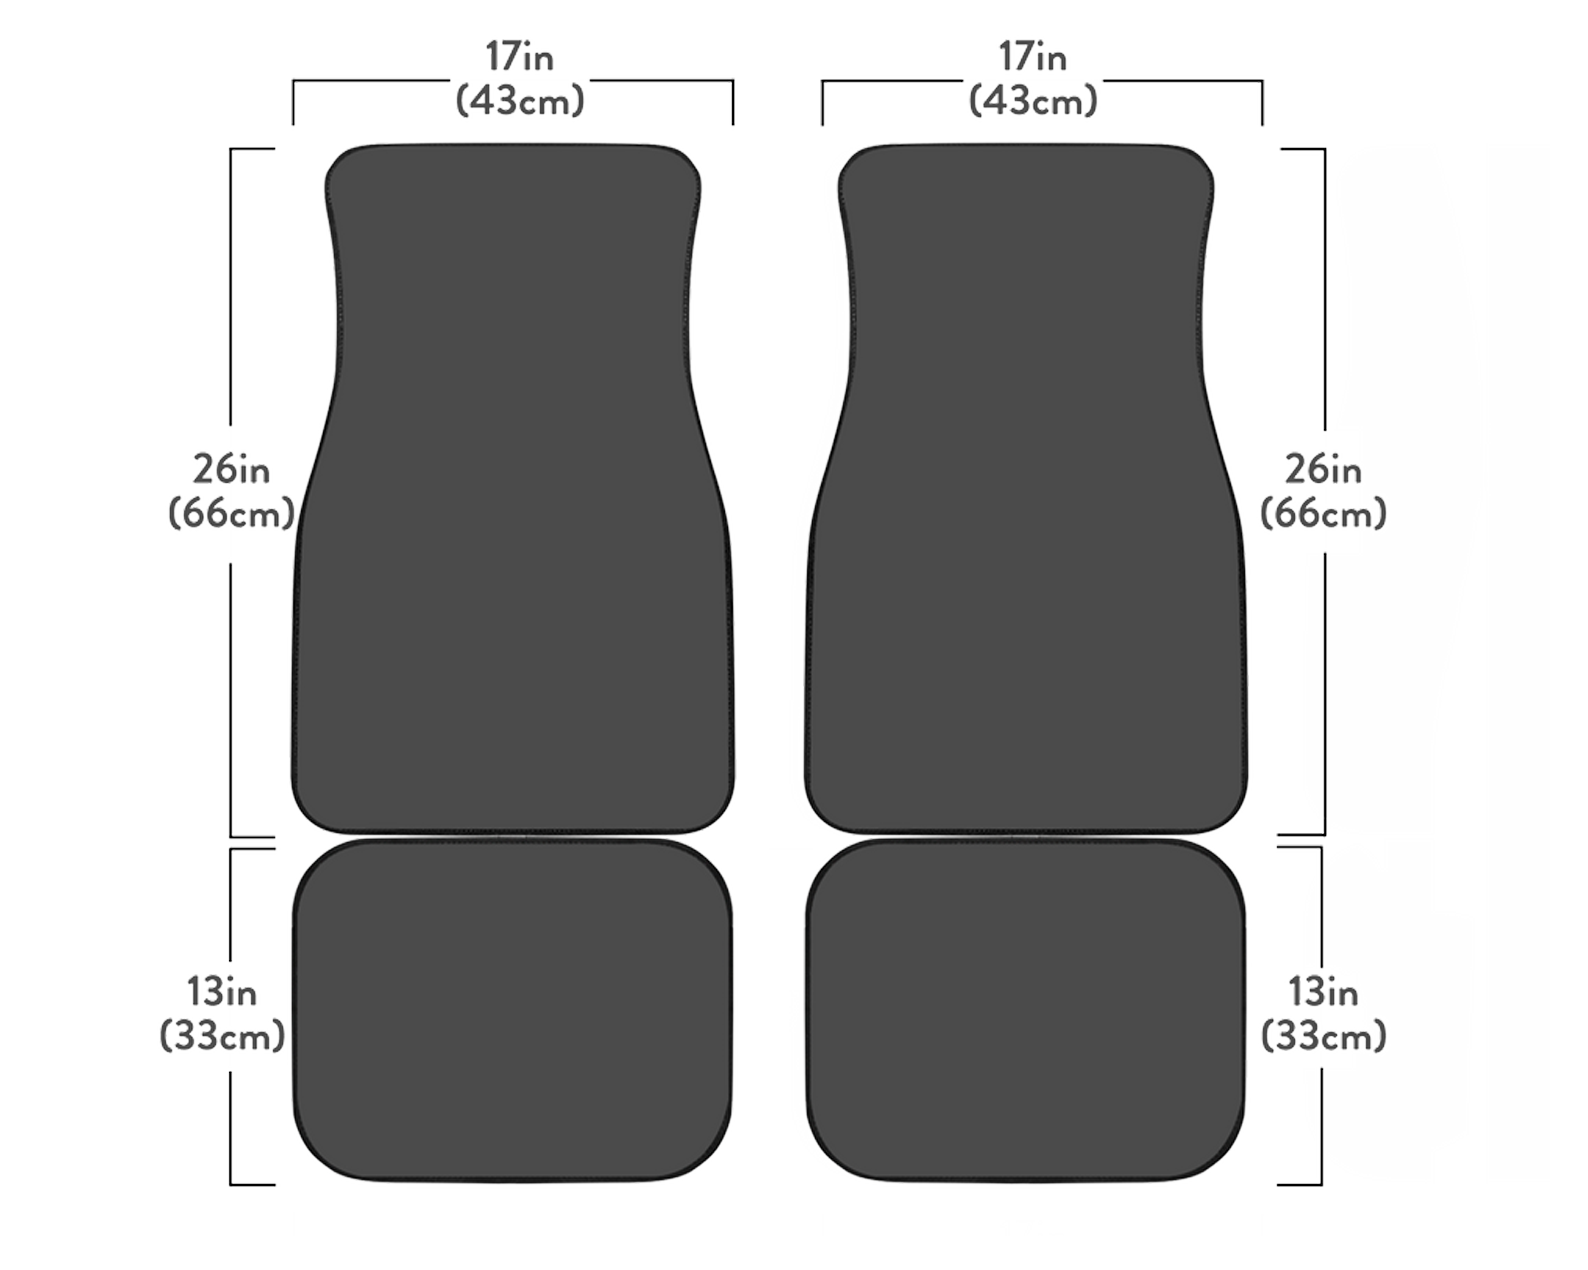 front and back car mats sizing chart